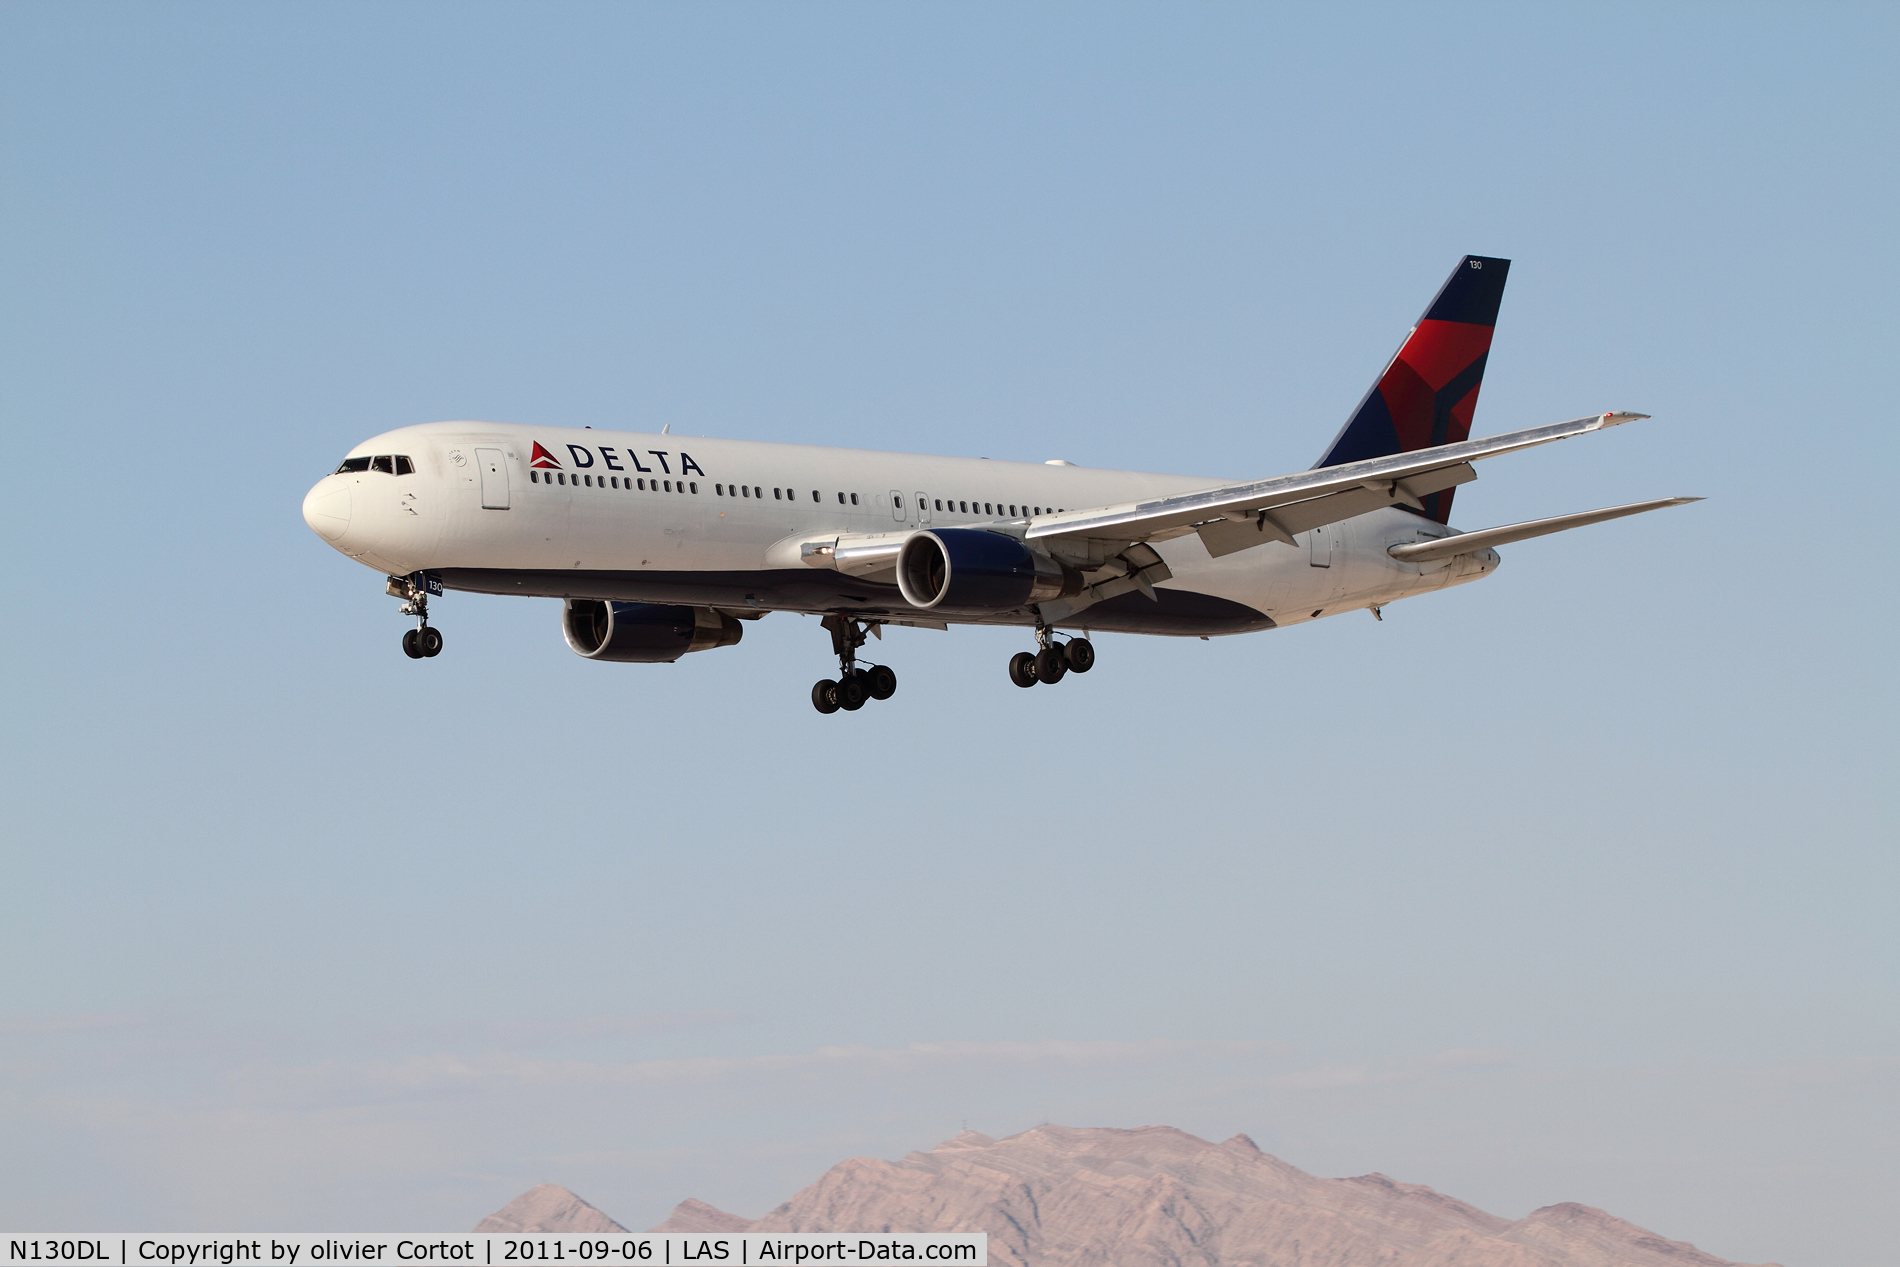 N130DL, 1988 Boeing 767-332 C/N 24080, 767 over nevada's moutains